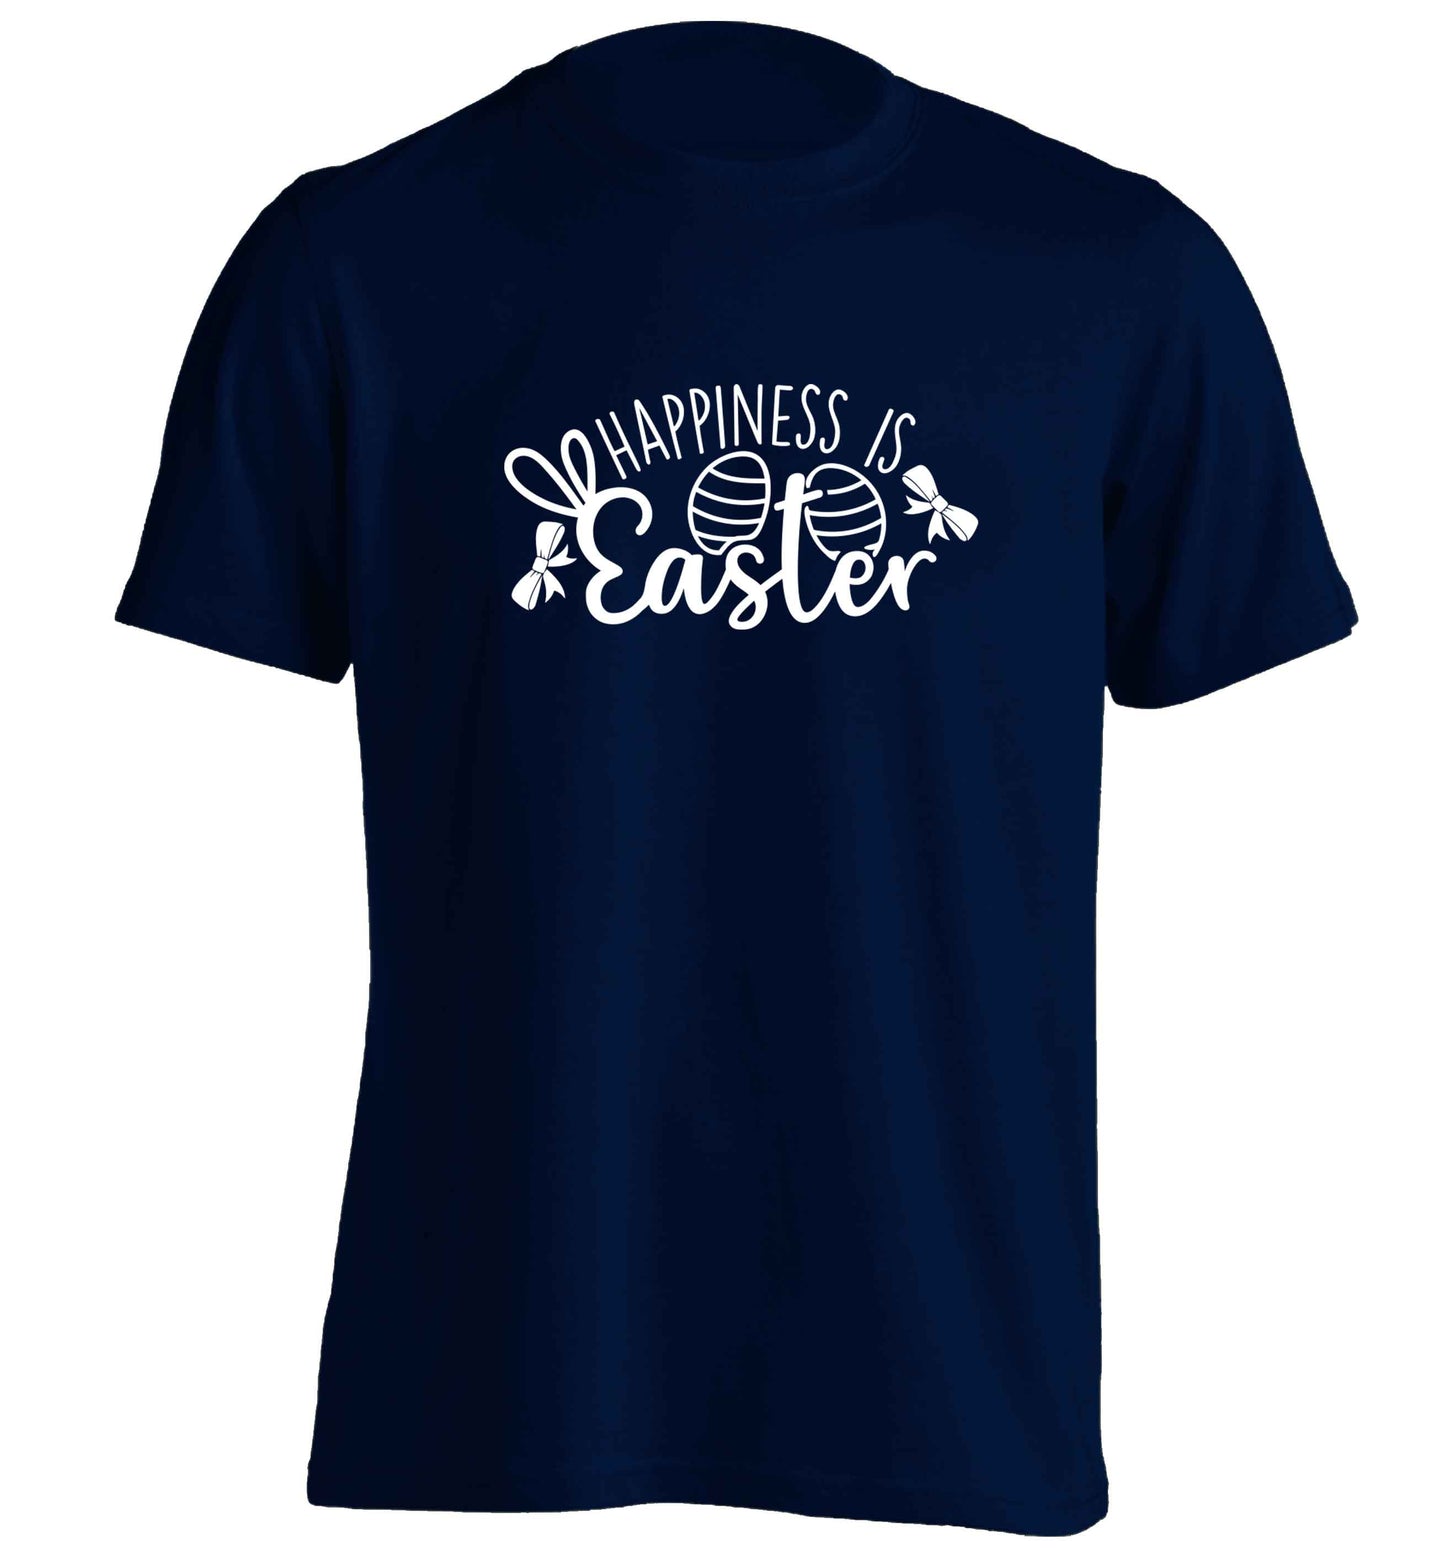 Happiness is easter adults unisex navy Tshirt 2XL